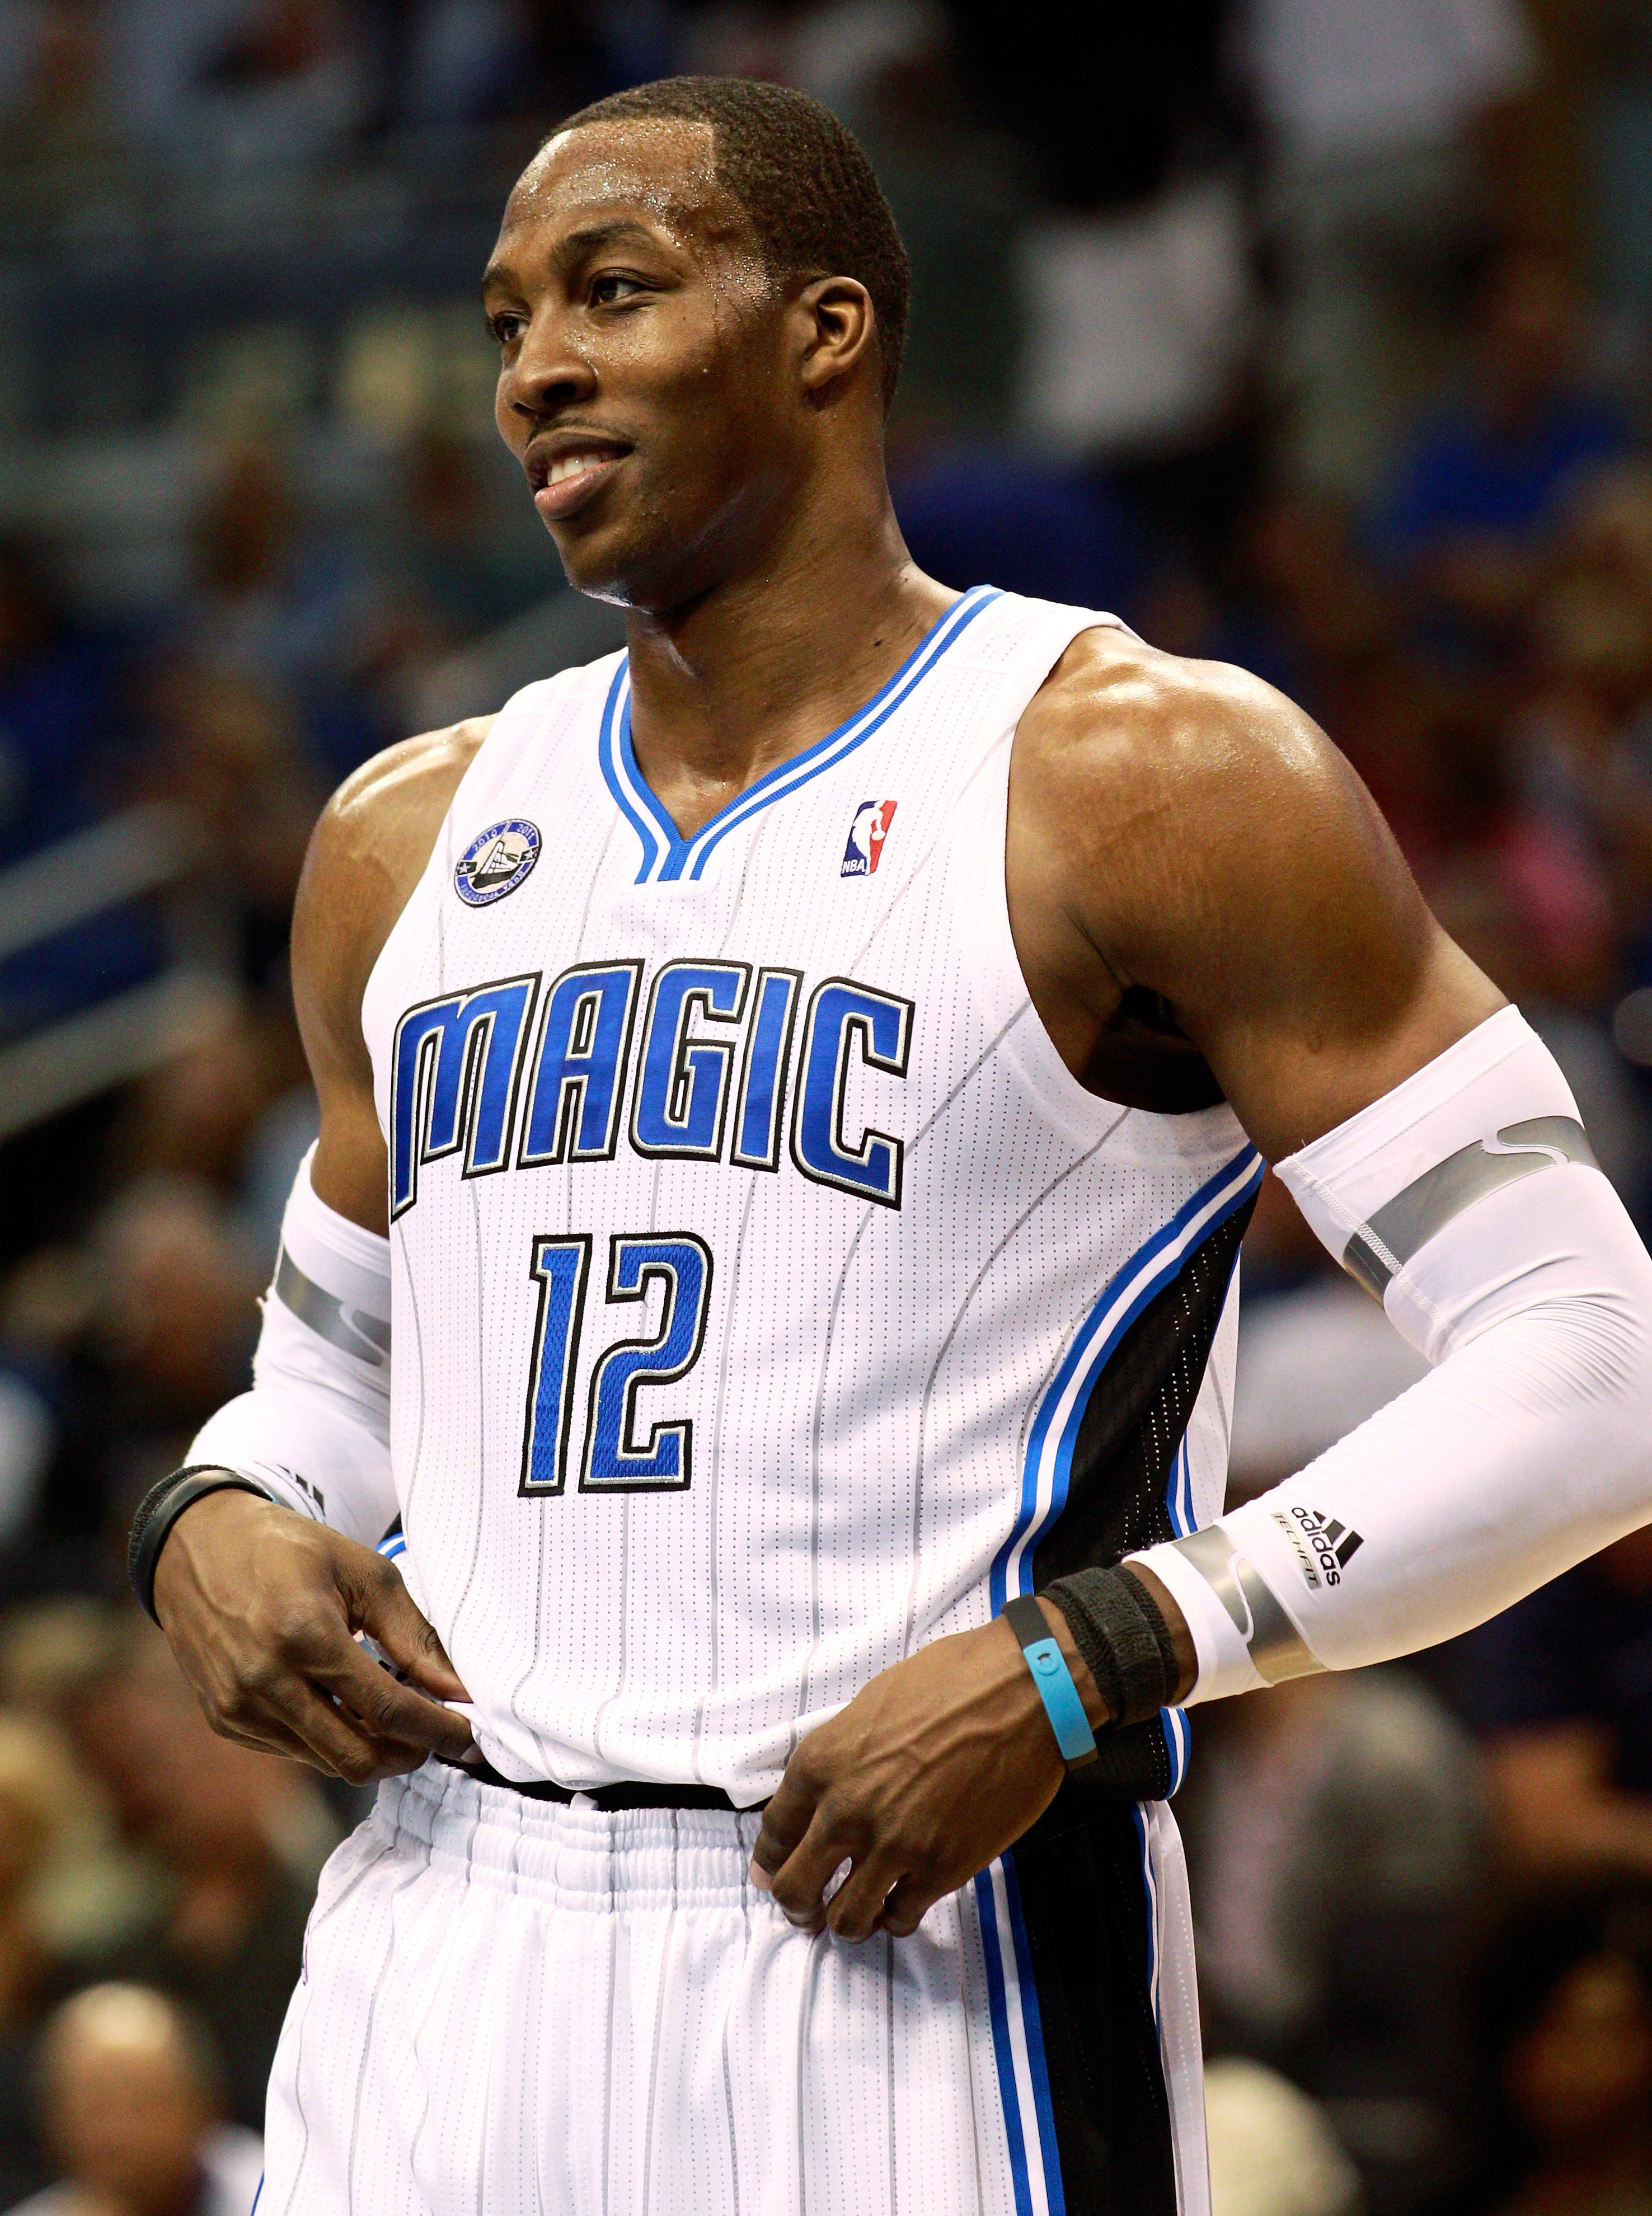 ORLANDO, FL - OCTOBER 10:  Dwight Howard #12 of the Orlando Magic smiles during the game against the New Orleans Hornets at Amway Arena on October 10, 2010 in Orlando, Florida. NOTE TO USER: User expressly acknowledges and agrees that, by downloading and